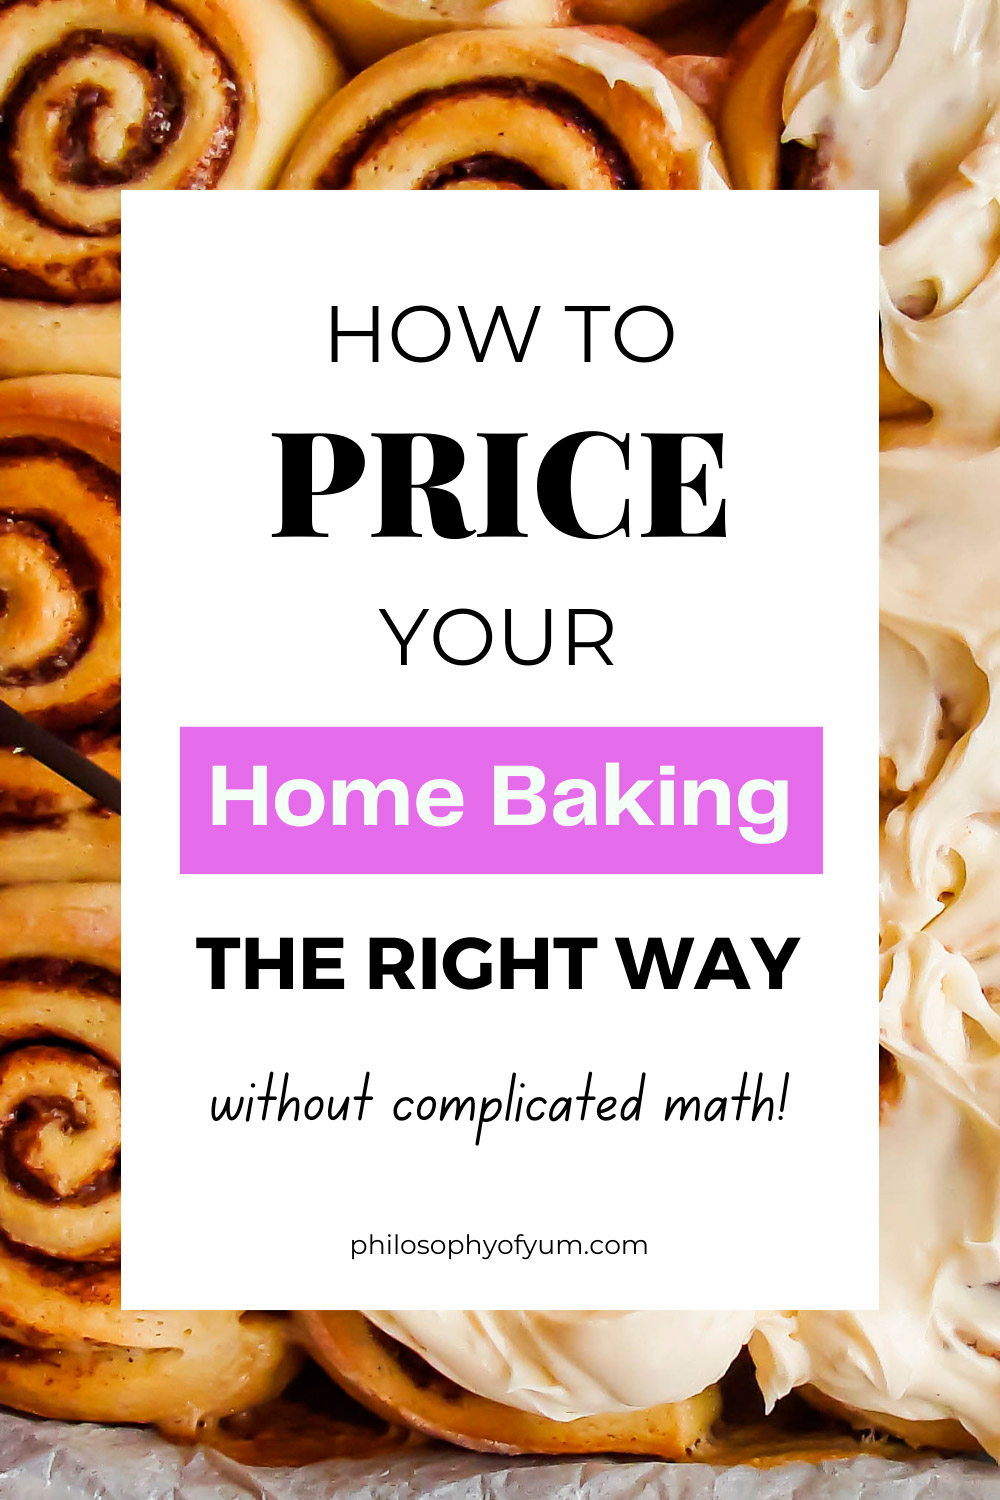 Pricing - ugh! How do you know if you're charging too much or too little? What if you charger too much and no one orders? Or what if you charge too little and don't make enough profit to survive? In this post you'll get everything you need to settle your home baking pricing issues - forever! Get a free pricing calculator (pricing chart) download to do all the fancy math for you in your Home Bakery Business! Click through to get started :D #homebakery #cakepricing #cakebusiness #bakingbusiness